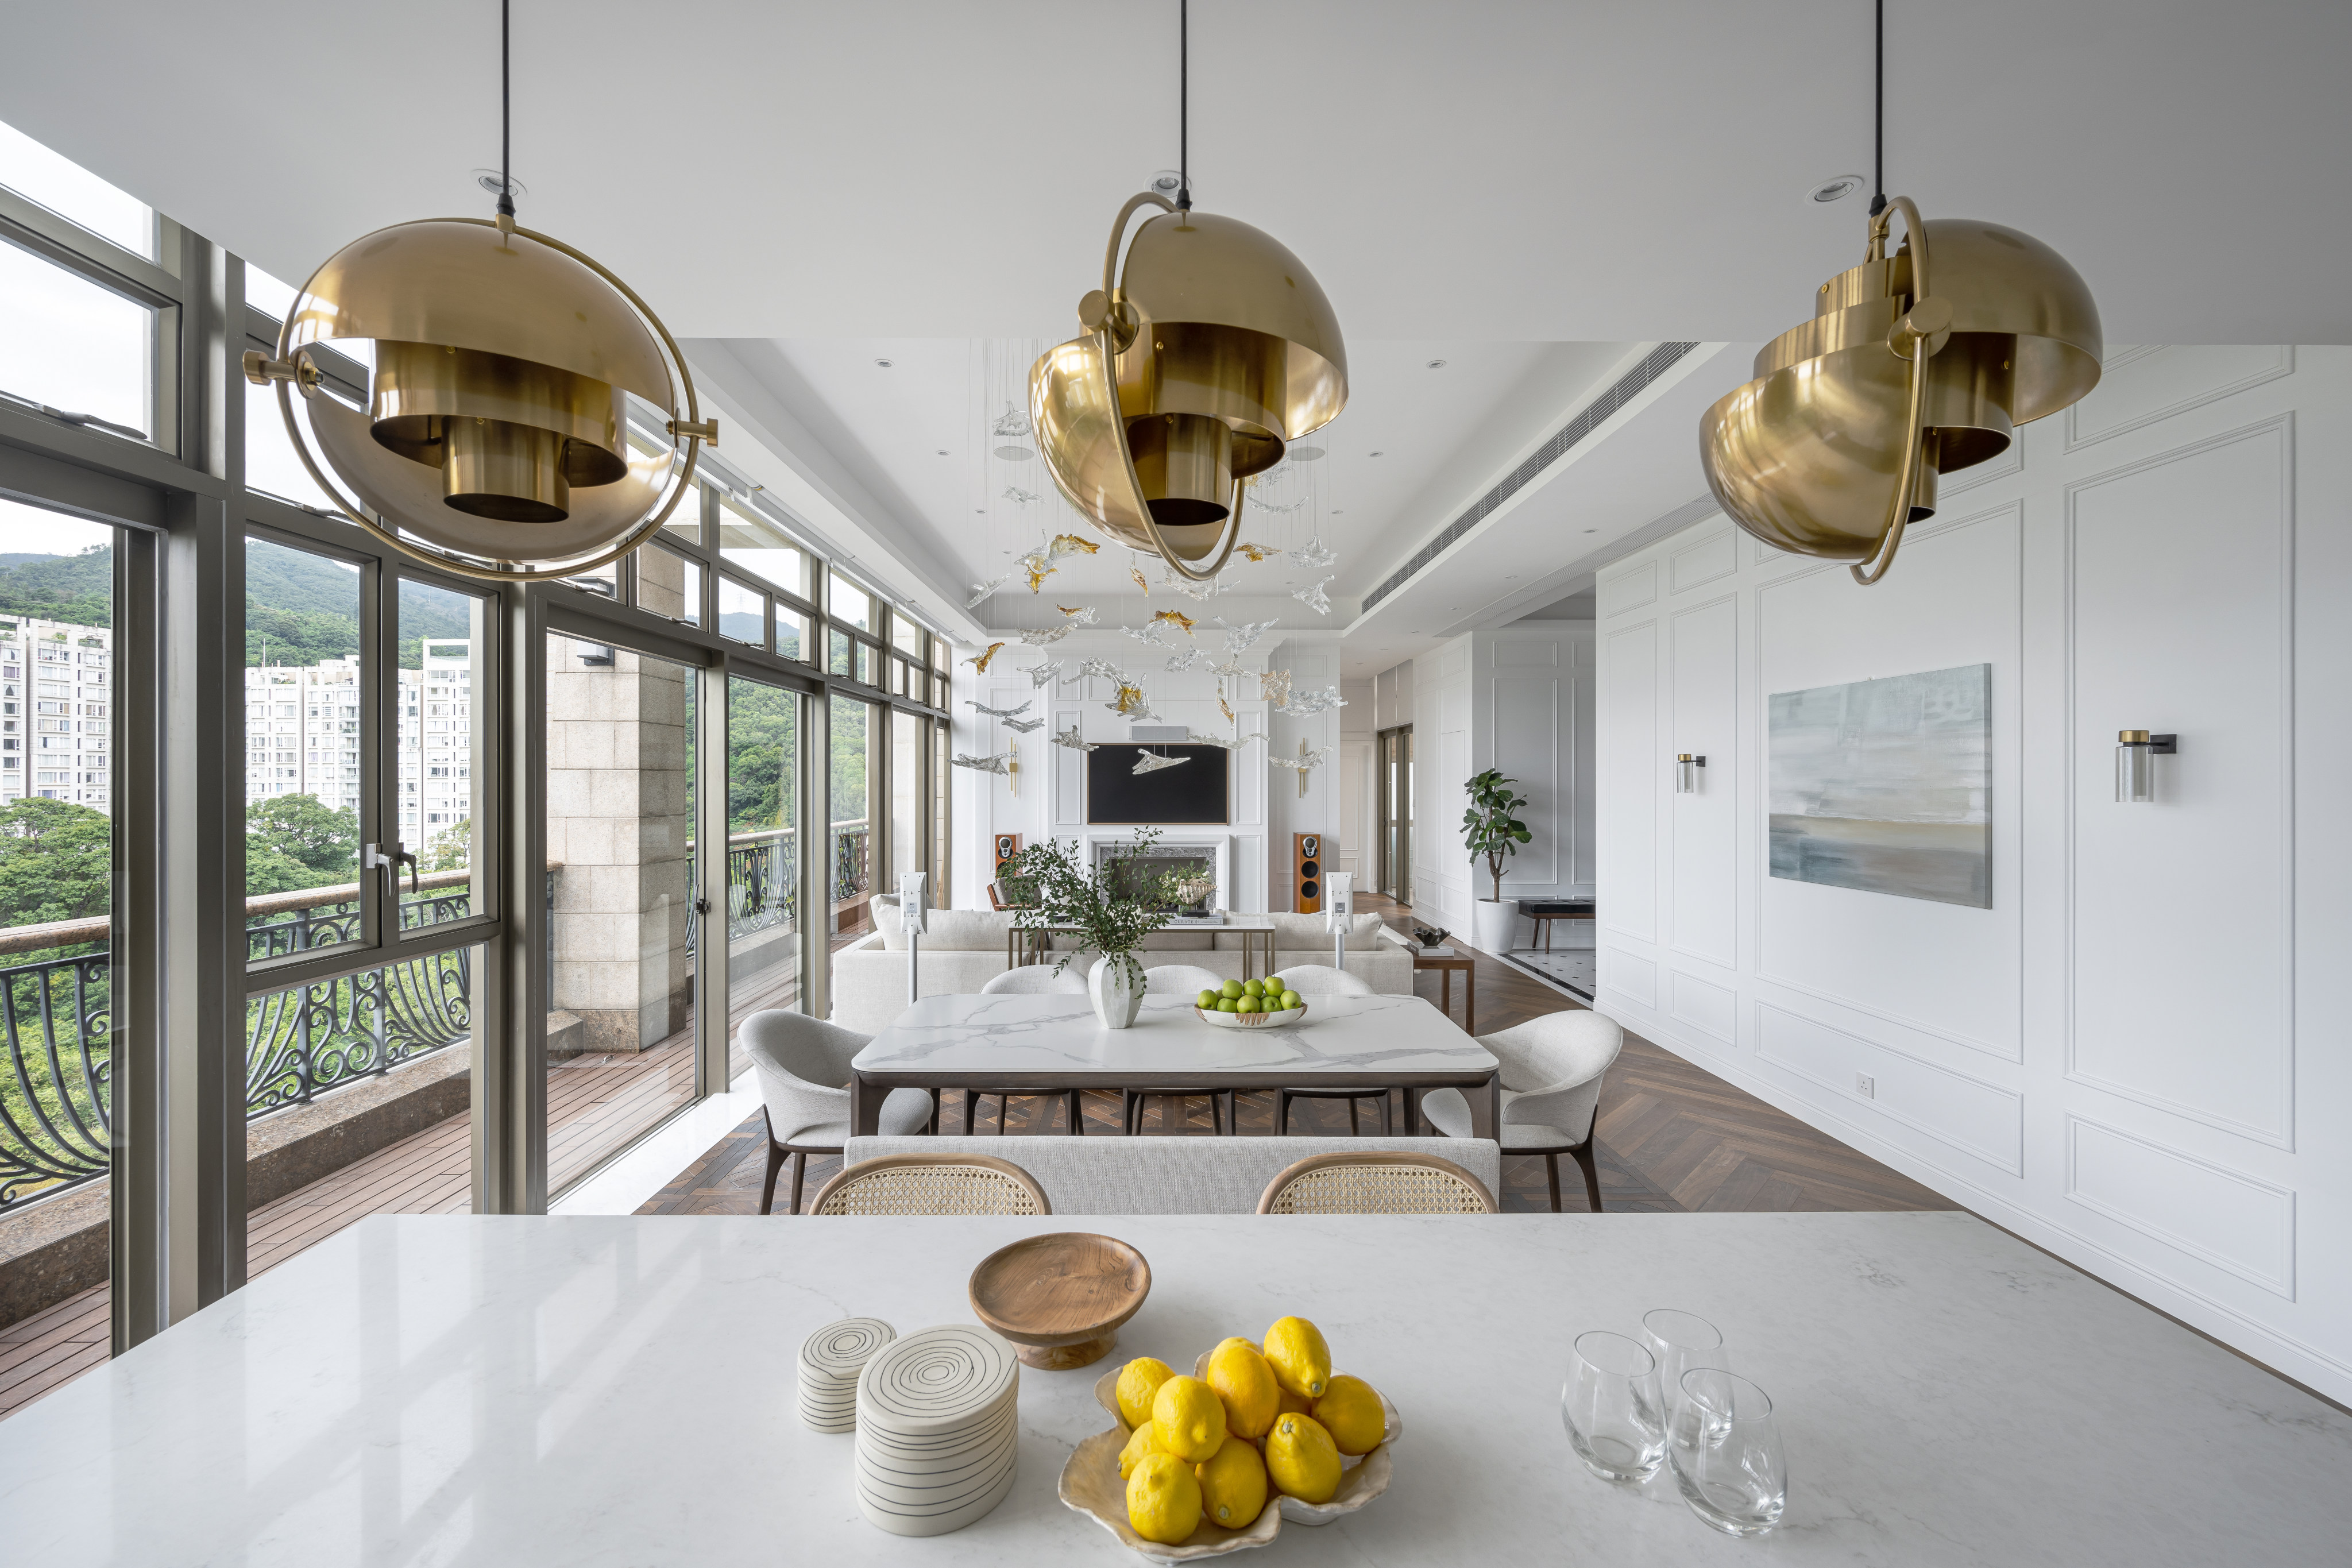 The 850 sq ft living area, divided into two zones, at the Sha Tin home of Alex Lanoie and Kerry Li. The Grande Interior Design studio renovated the 2,293 sq ft penthouse apartment with private rooftop swimming pool, adding a study, nursery and dressing room. Photo: Dick Liu